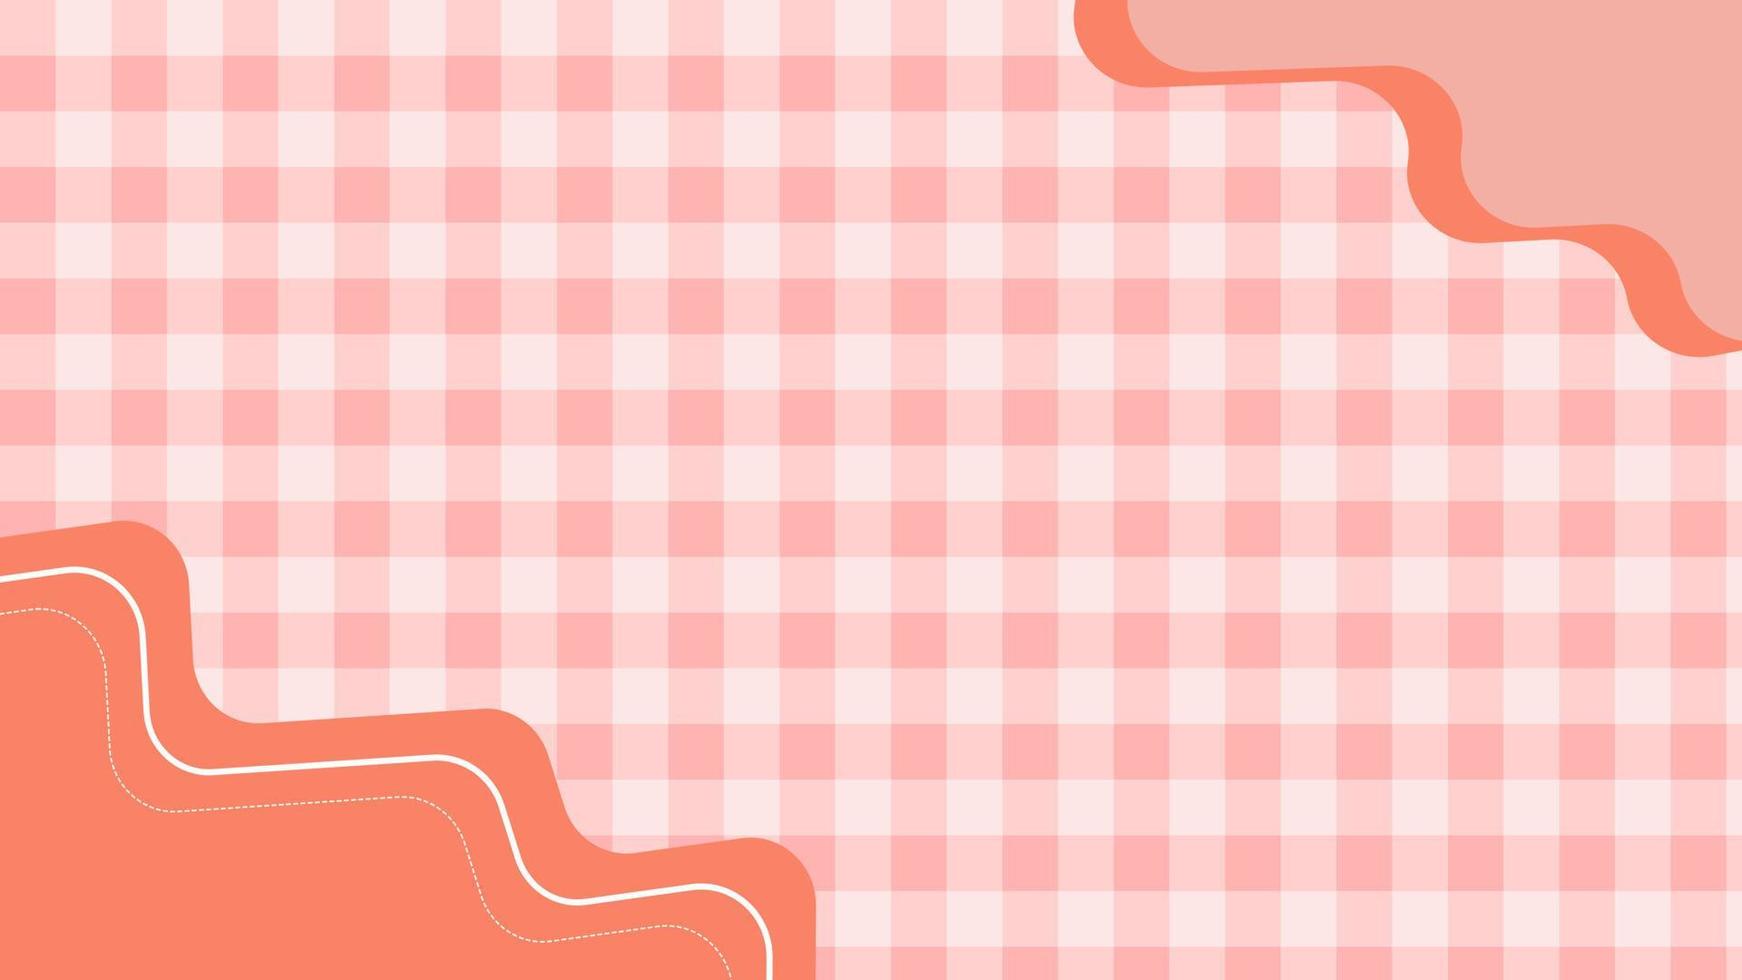 aesthetic minimal pink peach checkers, gingham, plaid, checkerboard wallpaper illustration, perfect for wallpaper, backdrop, postcard, background vector